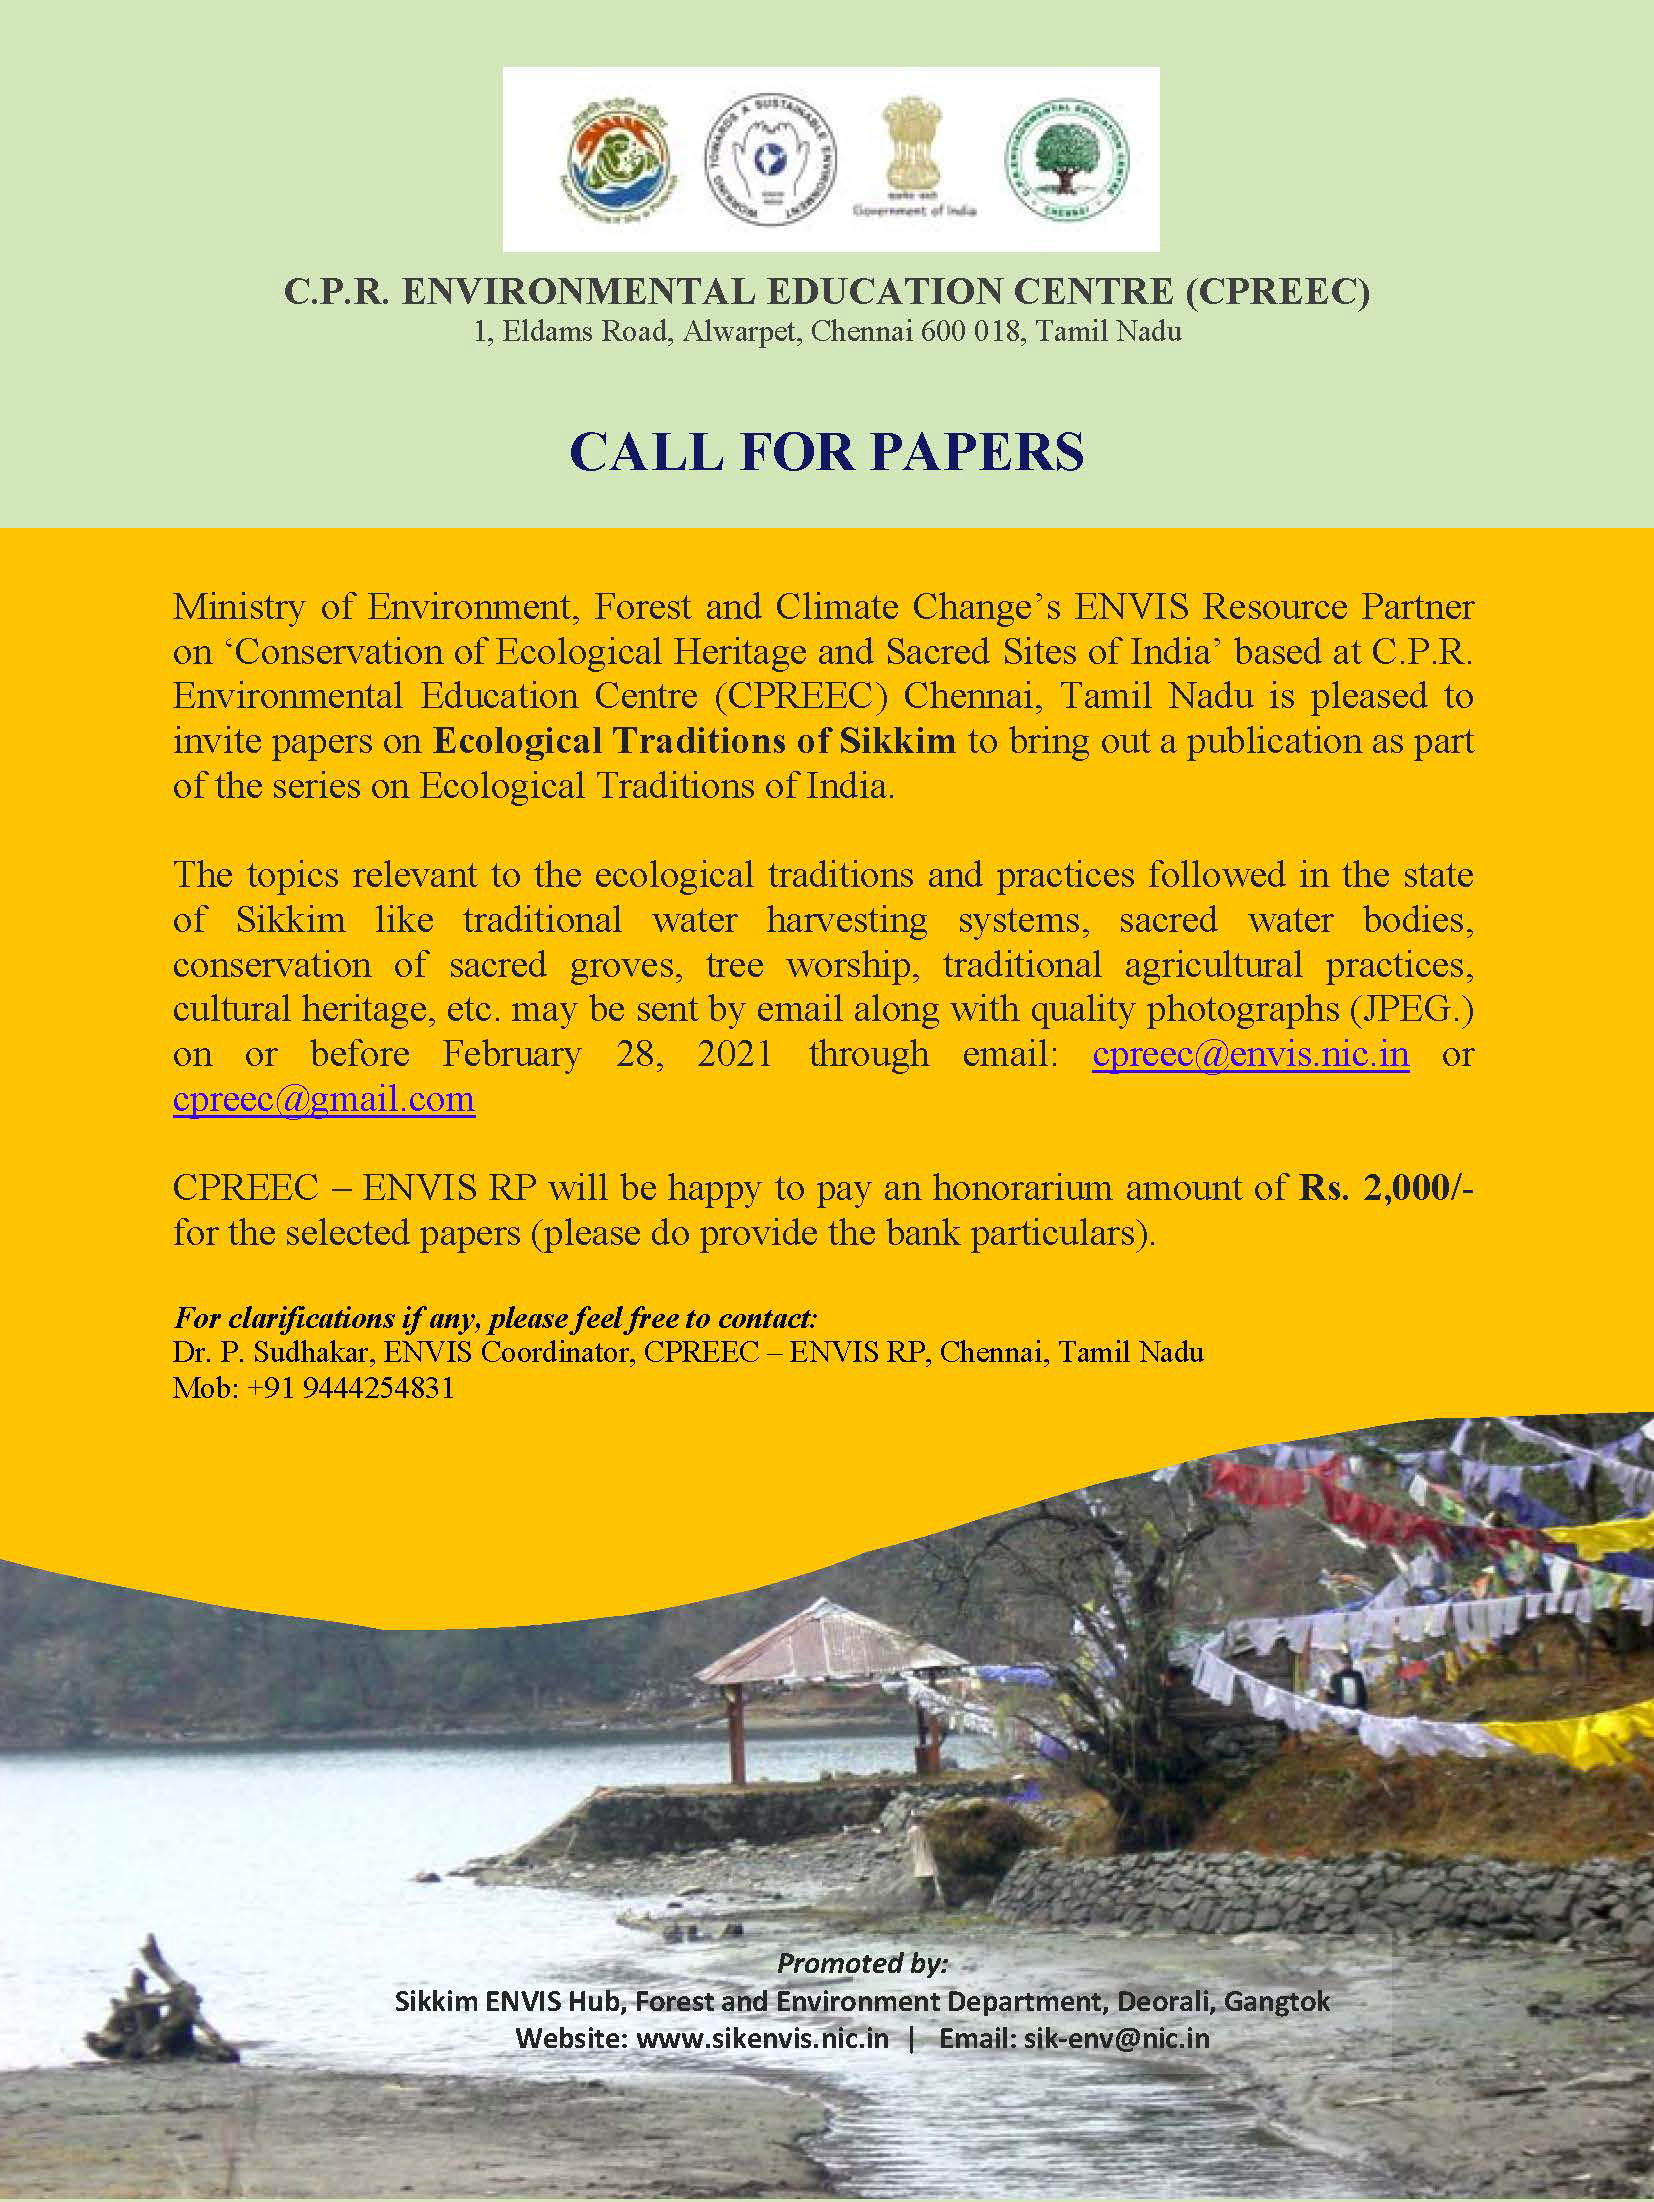 Call for Papers - Ecological Traditions of Sikkim